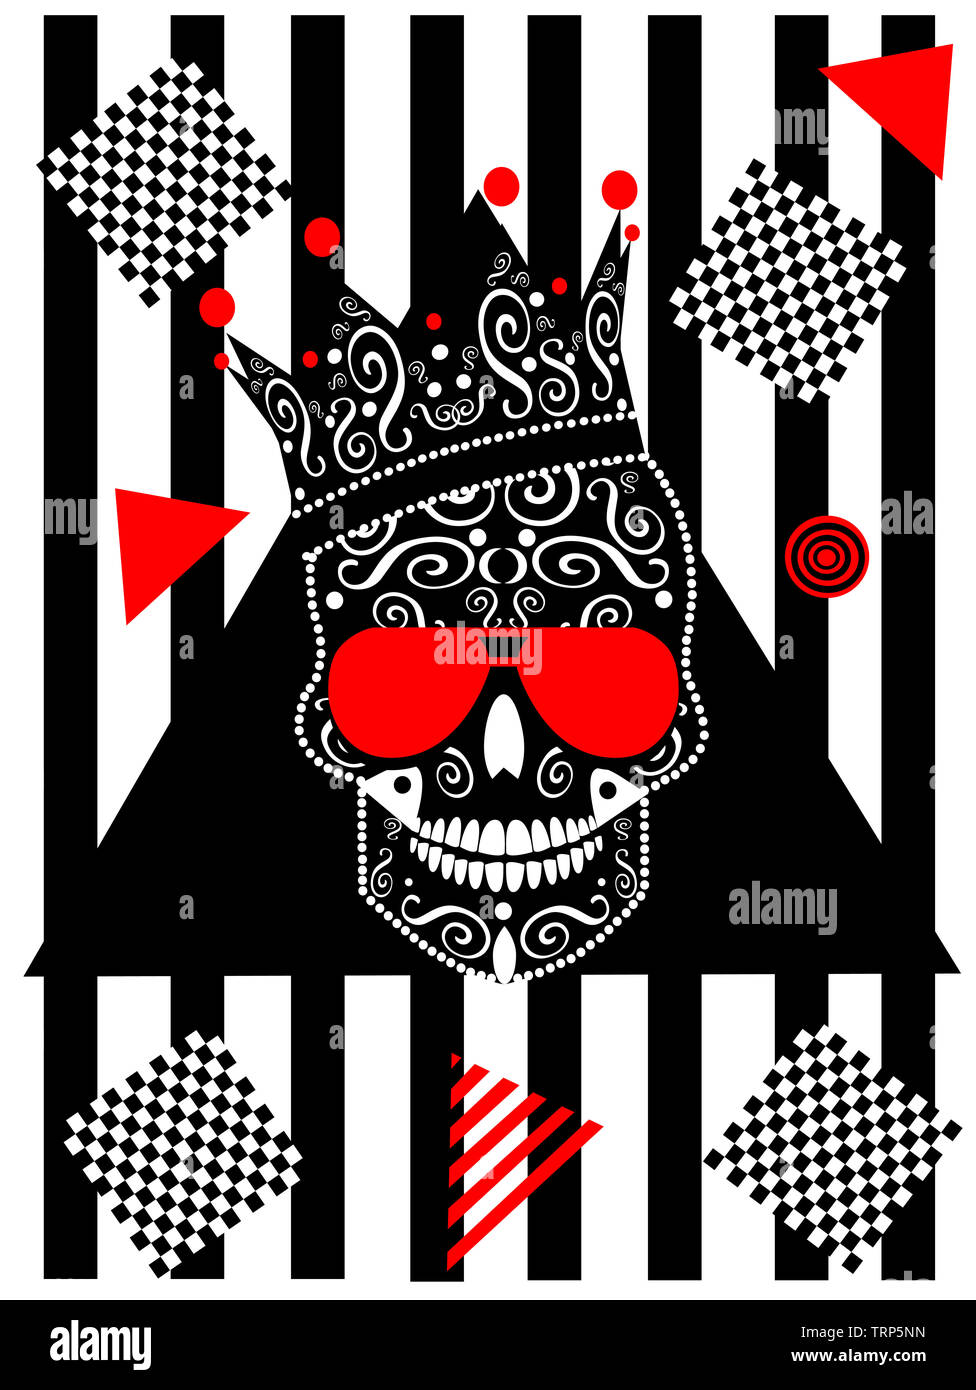 Card wih king skull icon and sunglasses, black and white stripes and red triangles Stock Photo